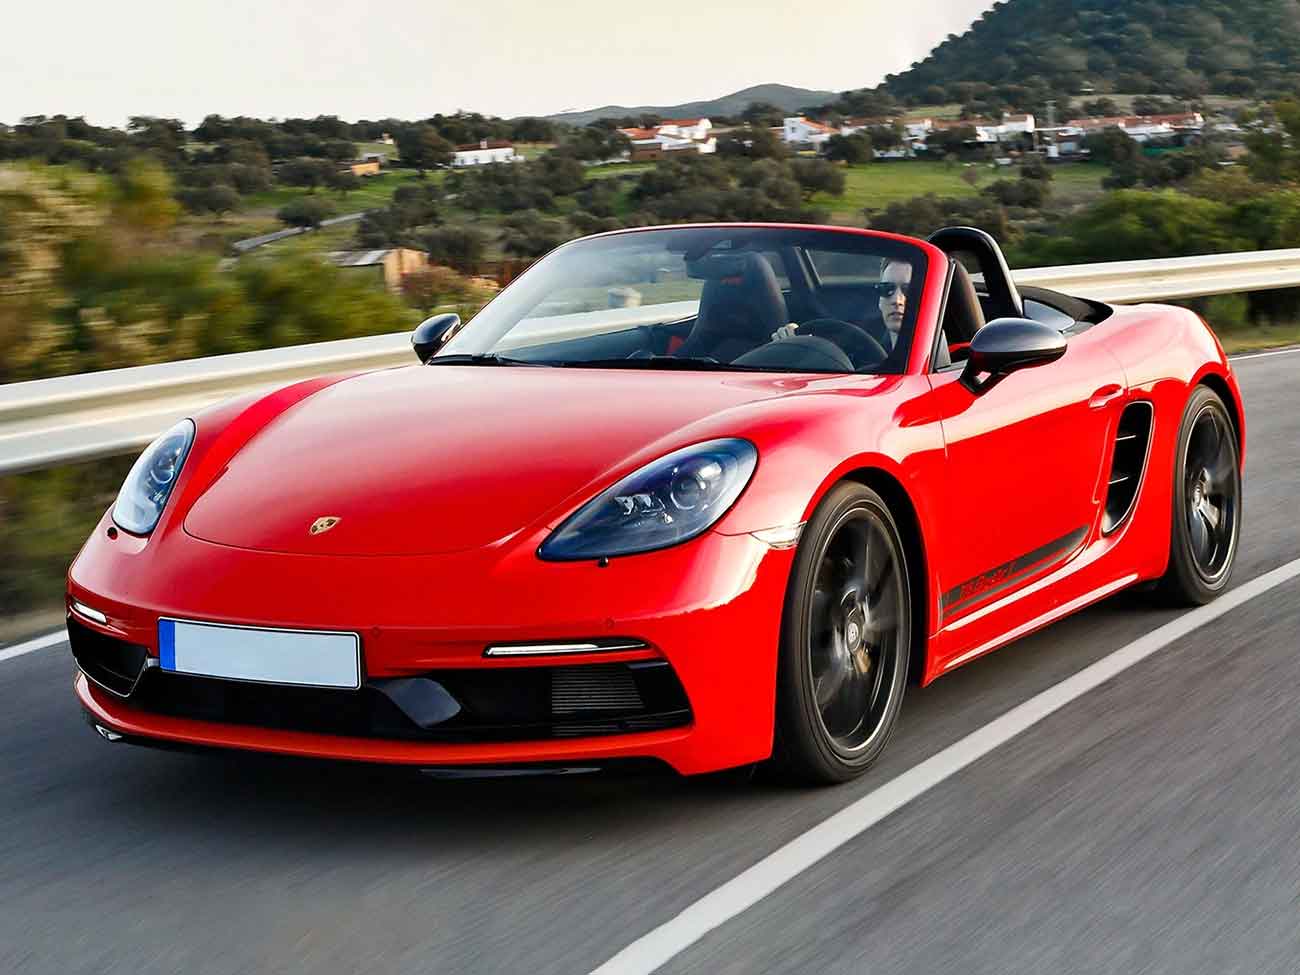 A Porsche Boxster in red